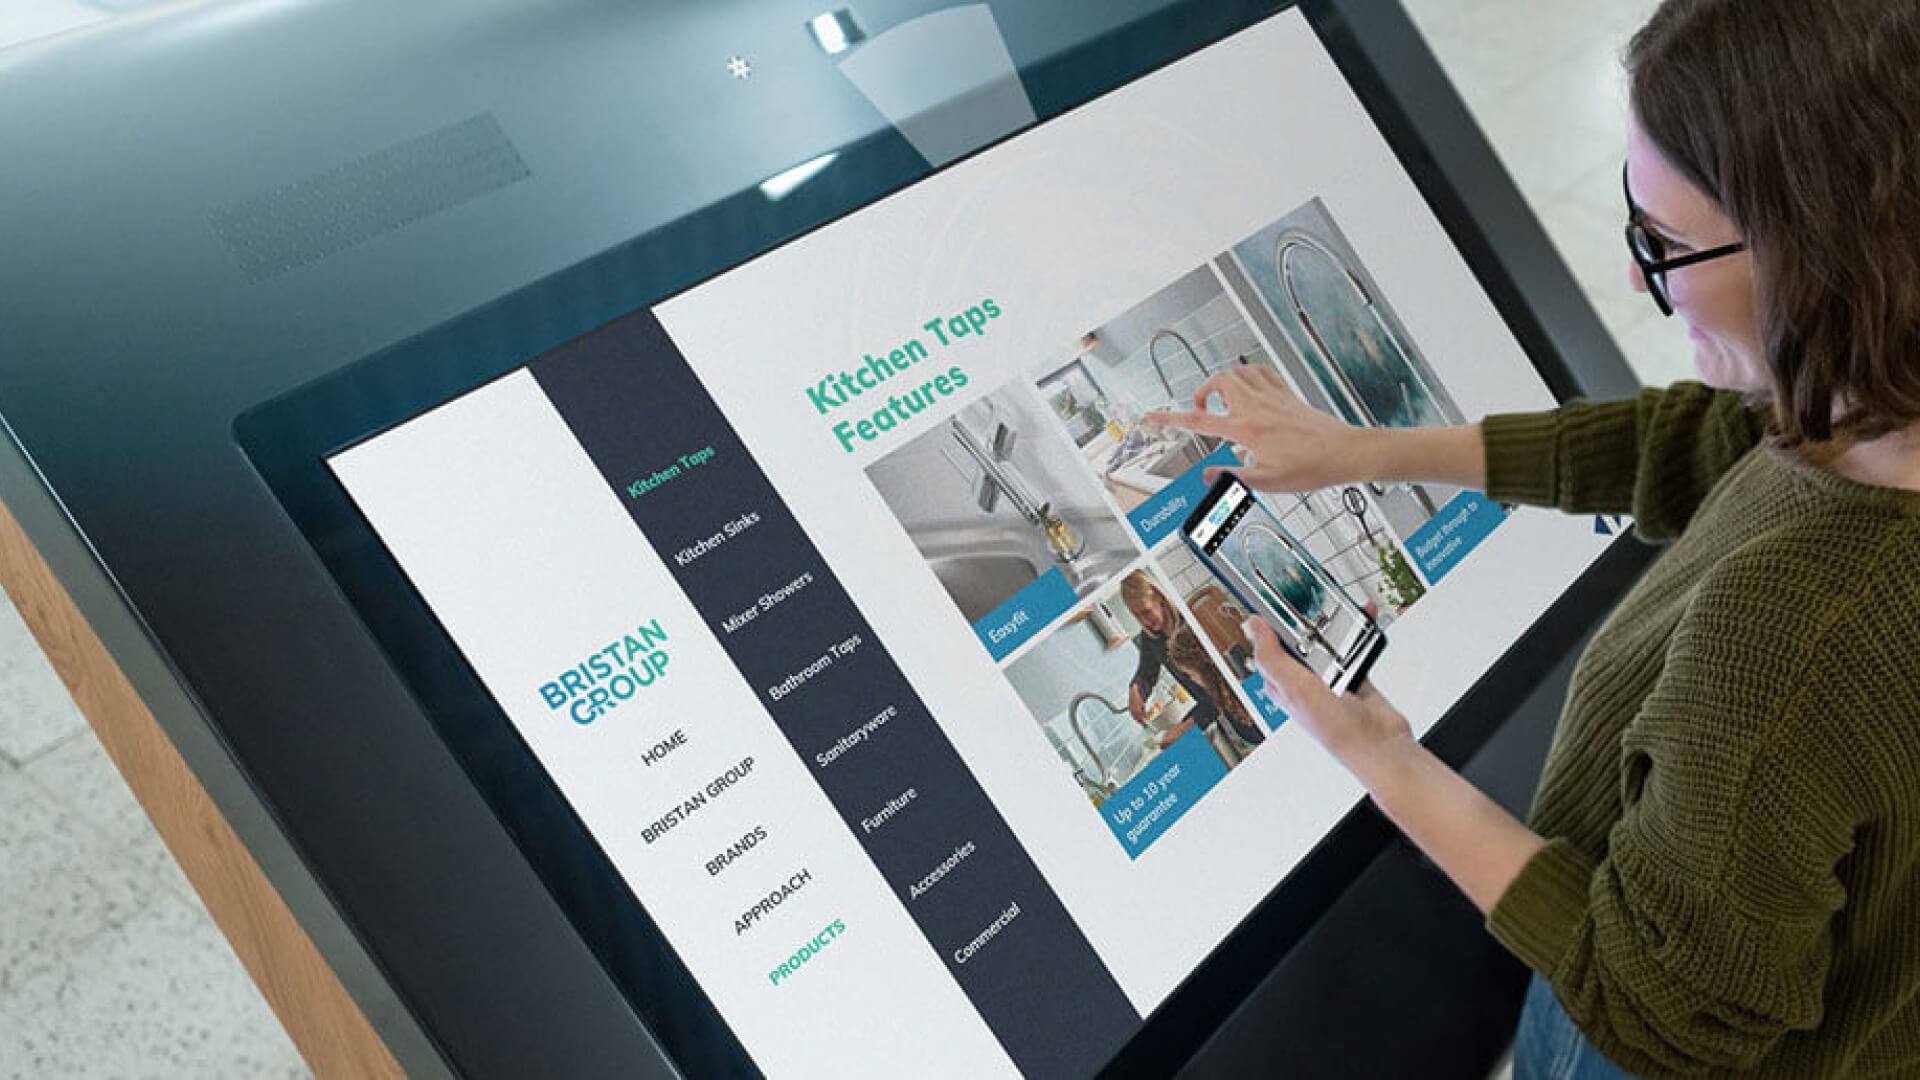  Interactive digital signage increasing customer engagement and retention.